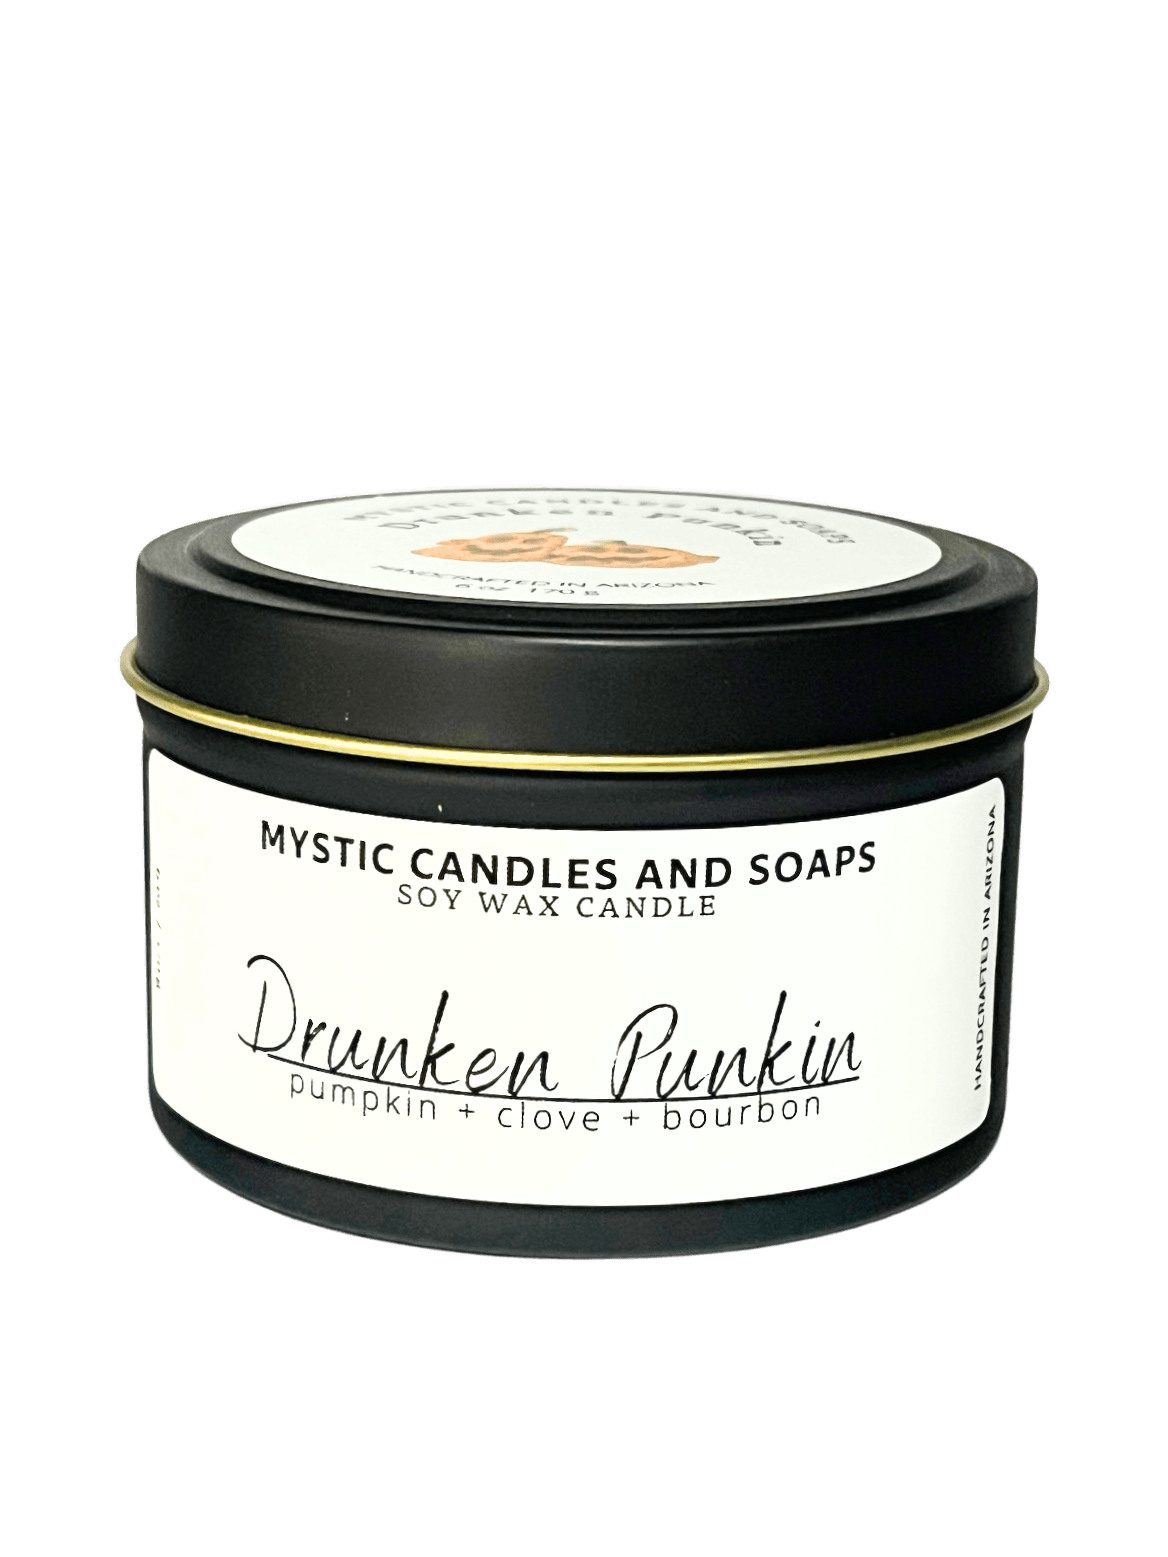 Drunken Punkin Candle - Mystic Candles and Soaps LLC